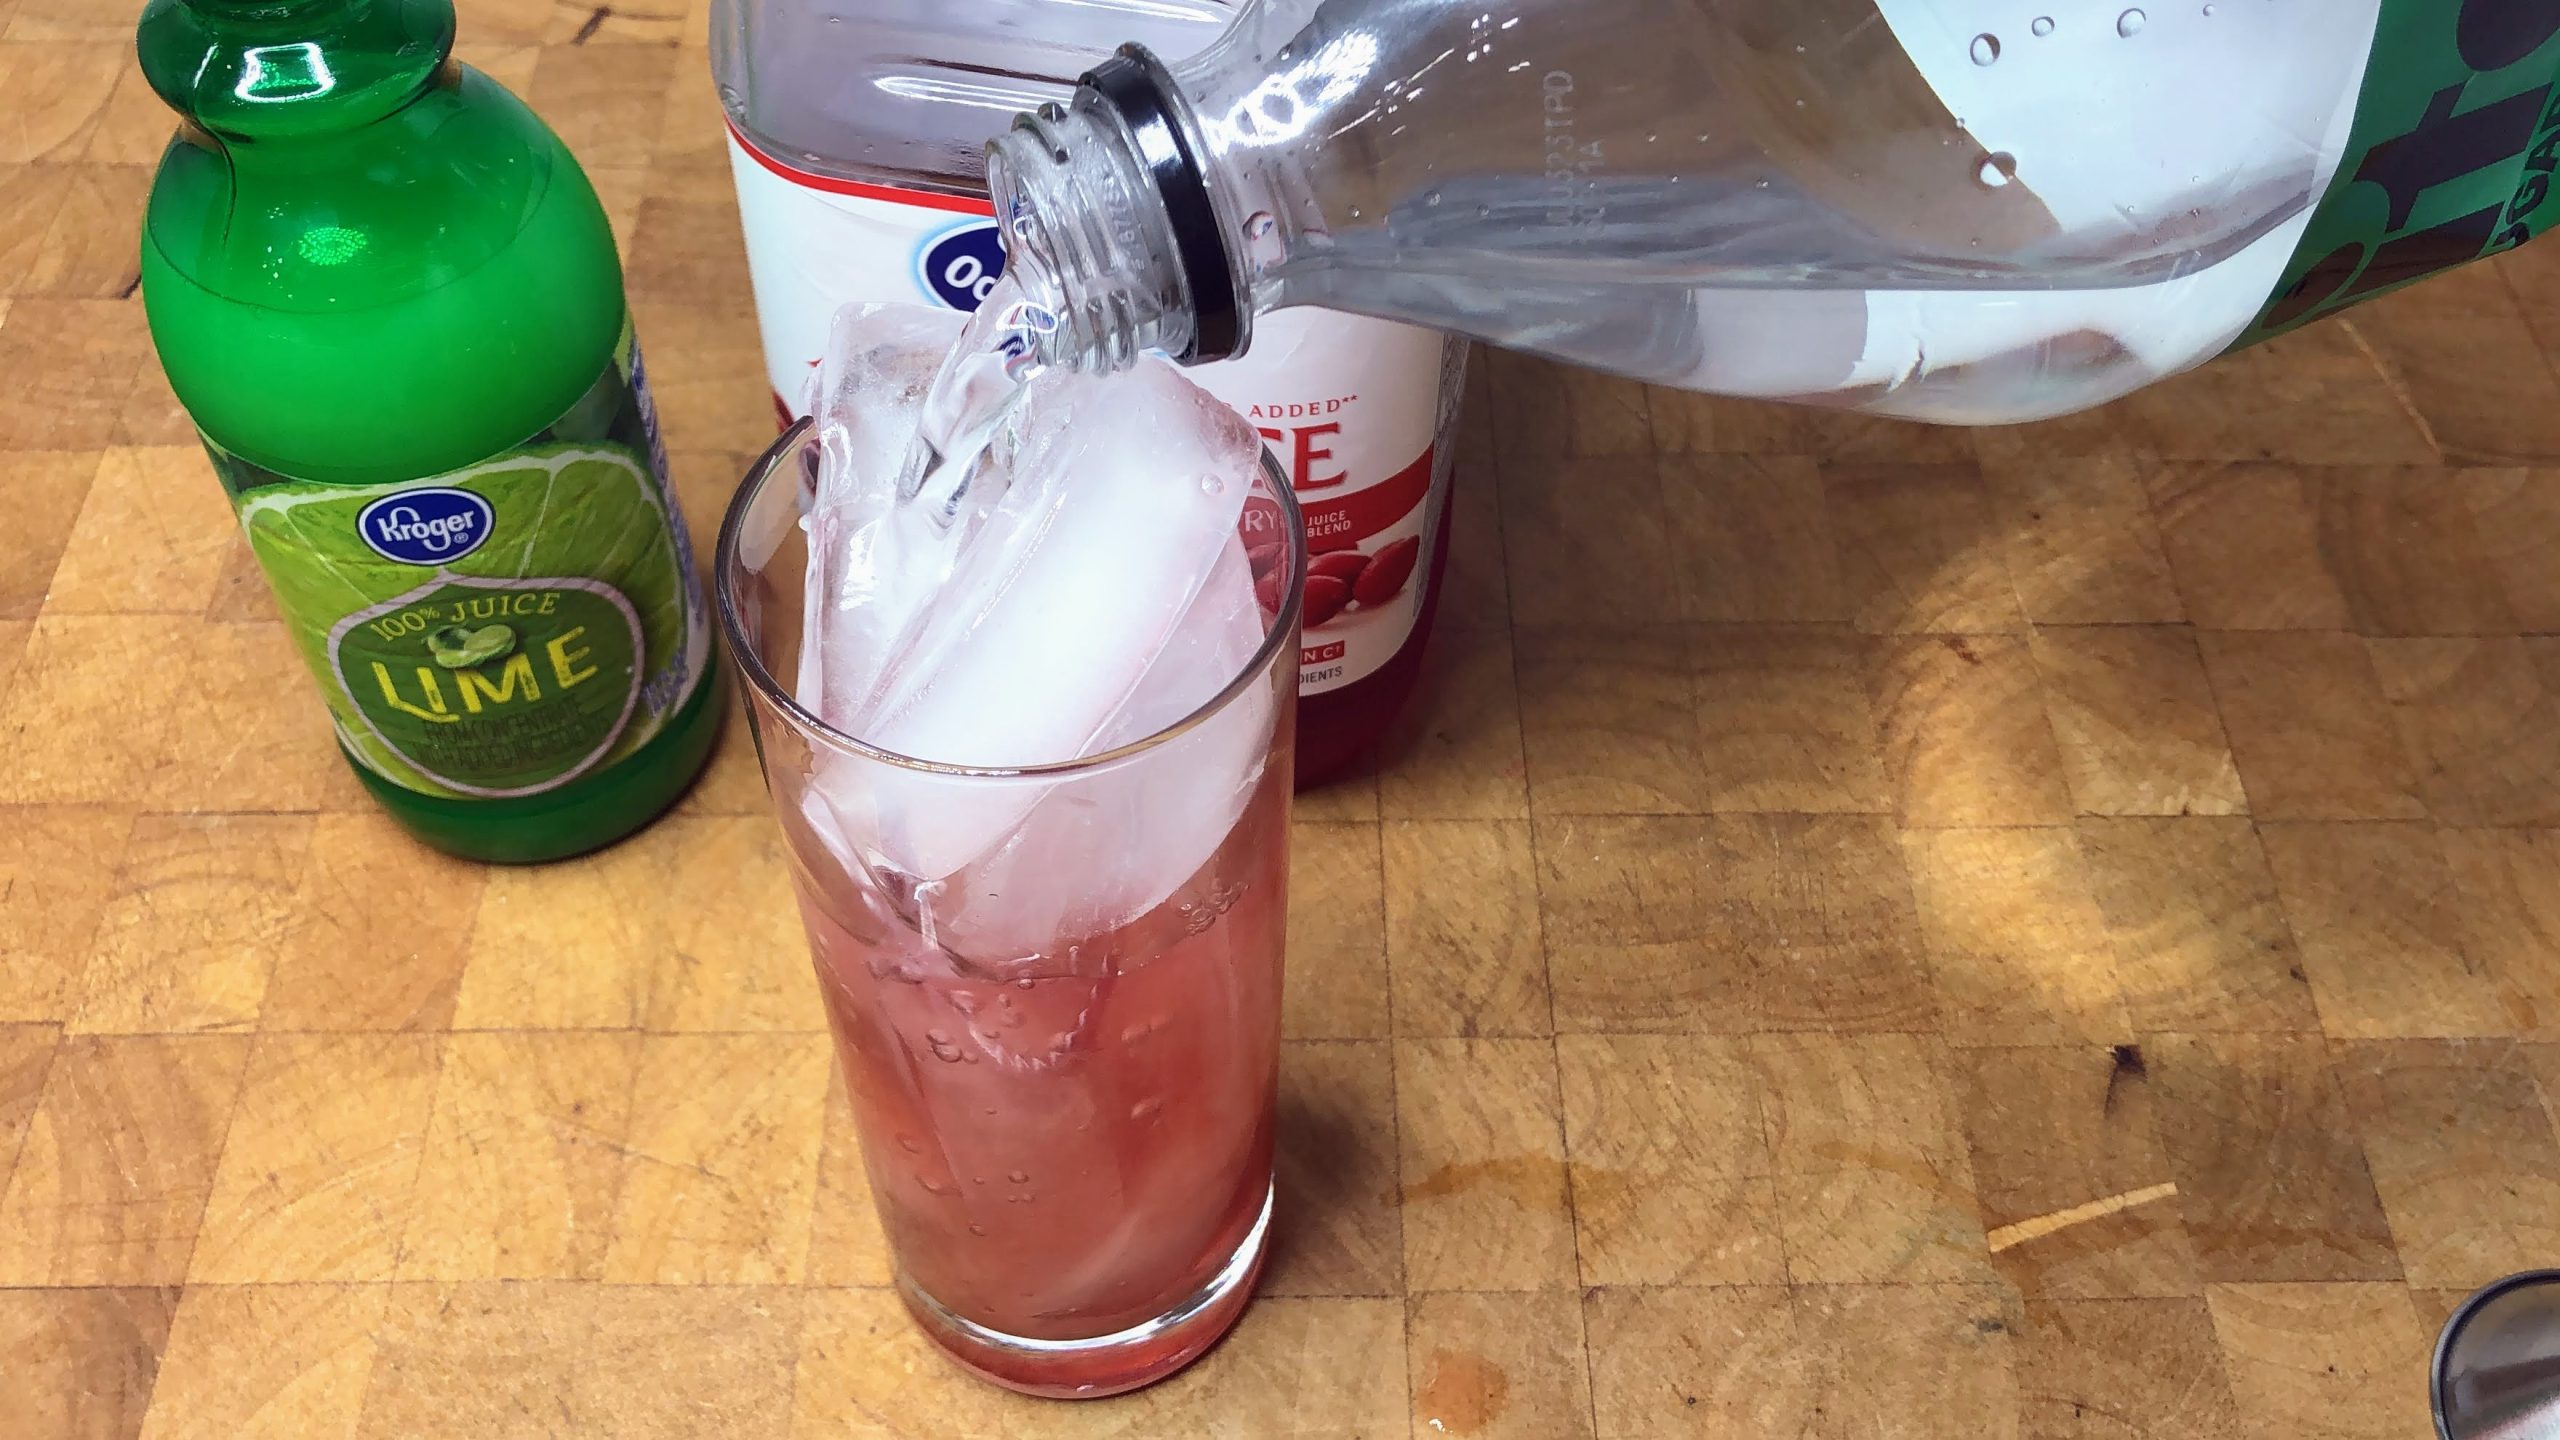 Pouring sprite from bottle into a glass.